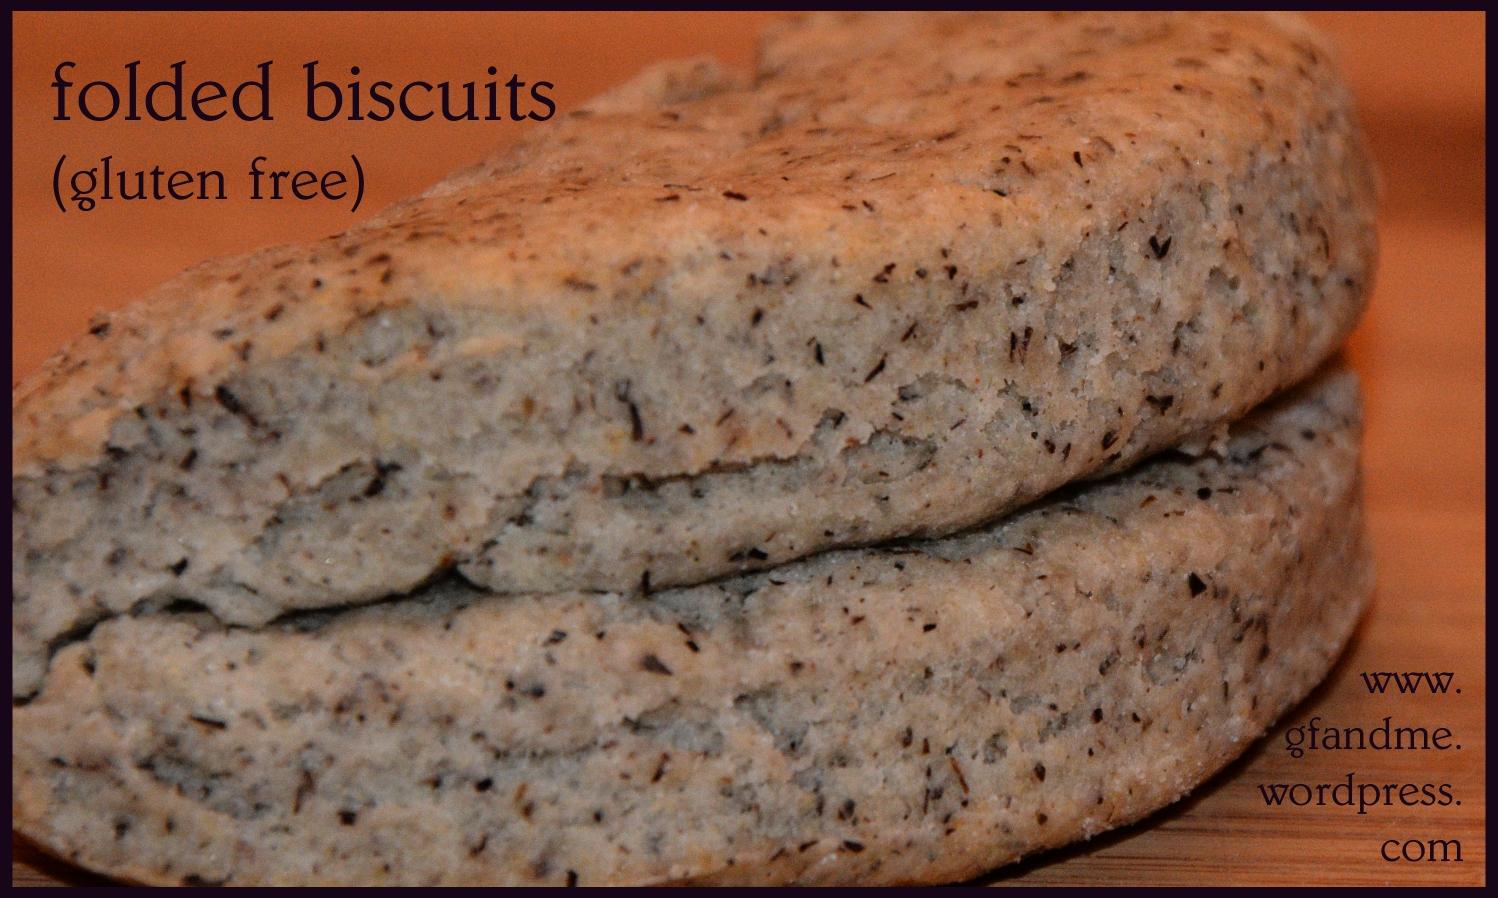  These gluten-free biscuits are perfect for everyone, not just those with dietary restrictions!